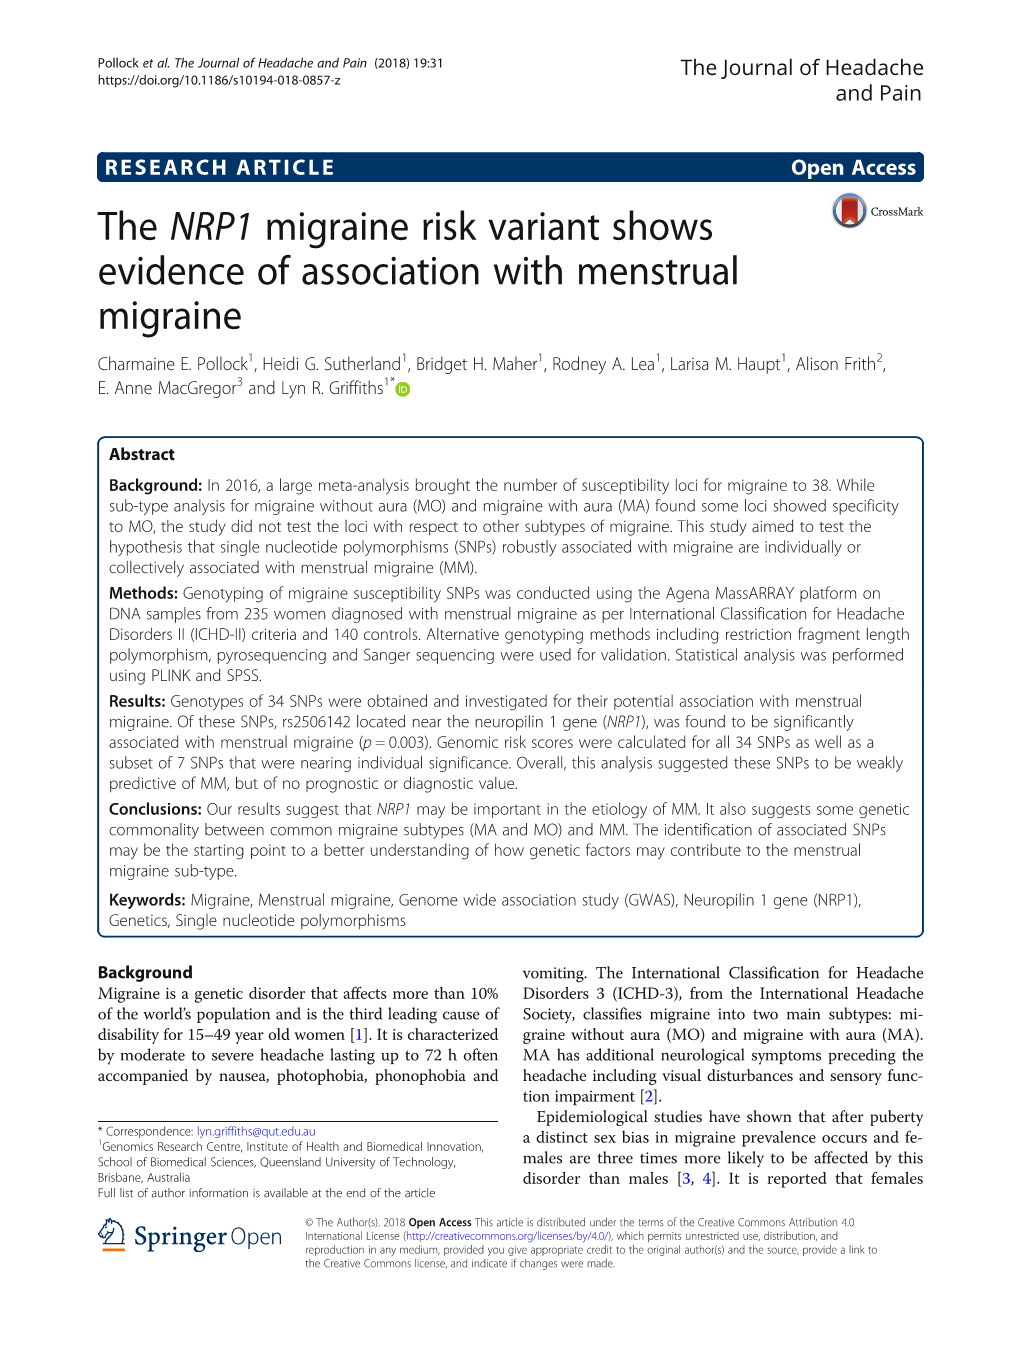 The NRP1 Migraine Risk Variant Shows Evidence of Association with Menstrual Migraine Charmaine E